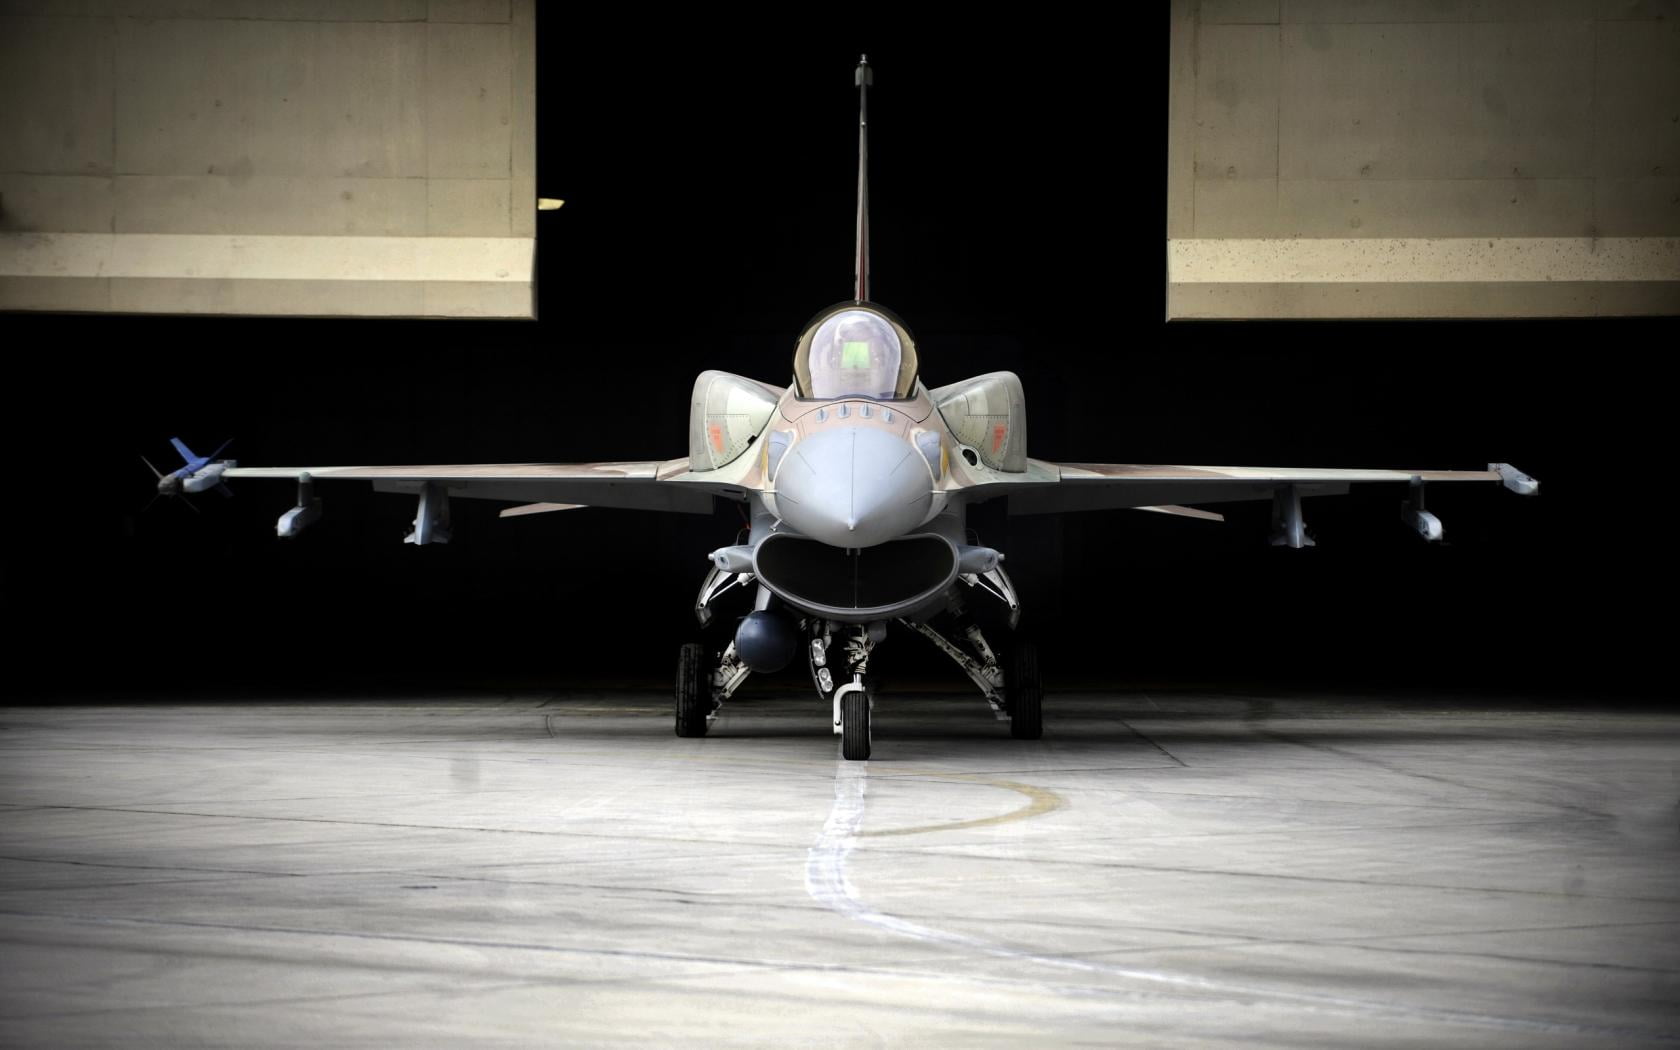 silver fighter jet, aircraft, General Dynamics F-16 Fighting Falcon, vehicle, military aircraft